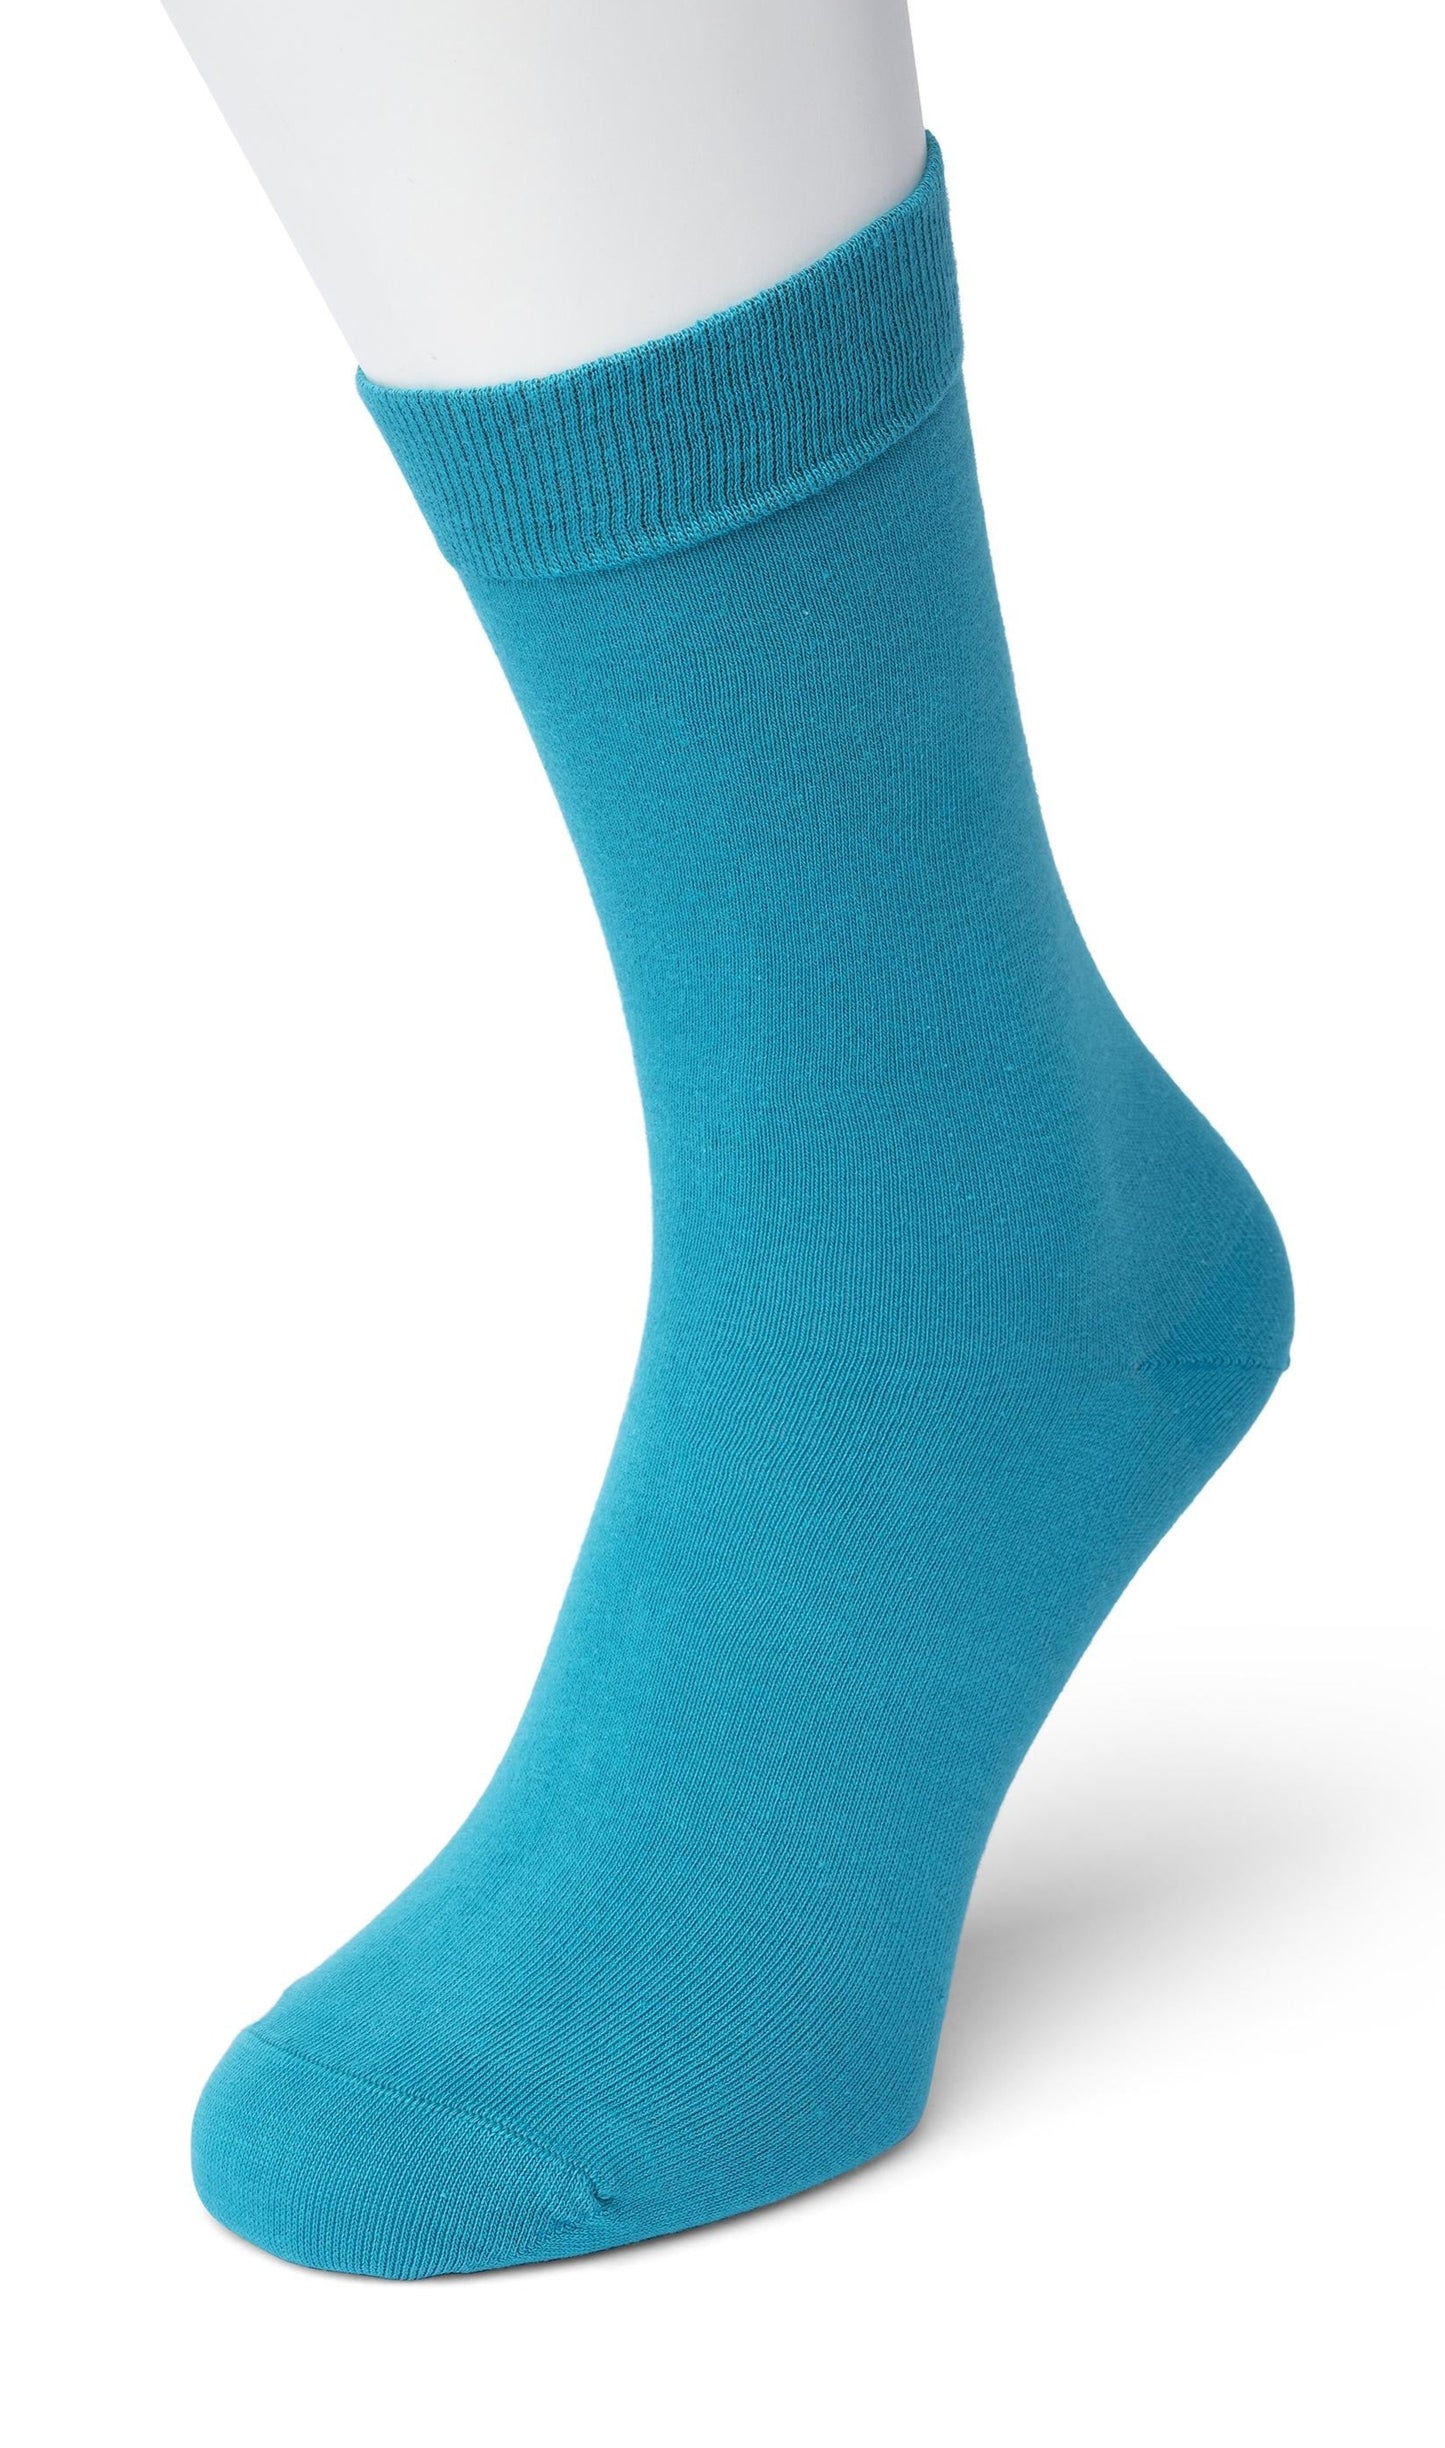 Bonnie Doon 83422 / BD632401 Cotton Sock - turquoise blue (curacao / peacock) ankle socks available in men and women sizes